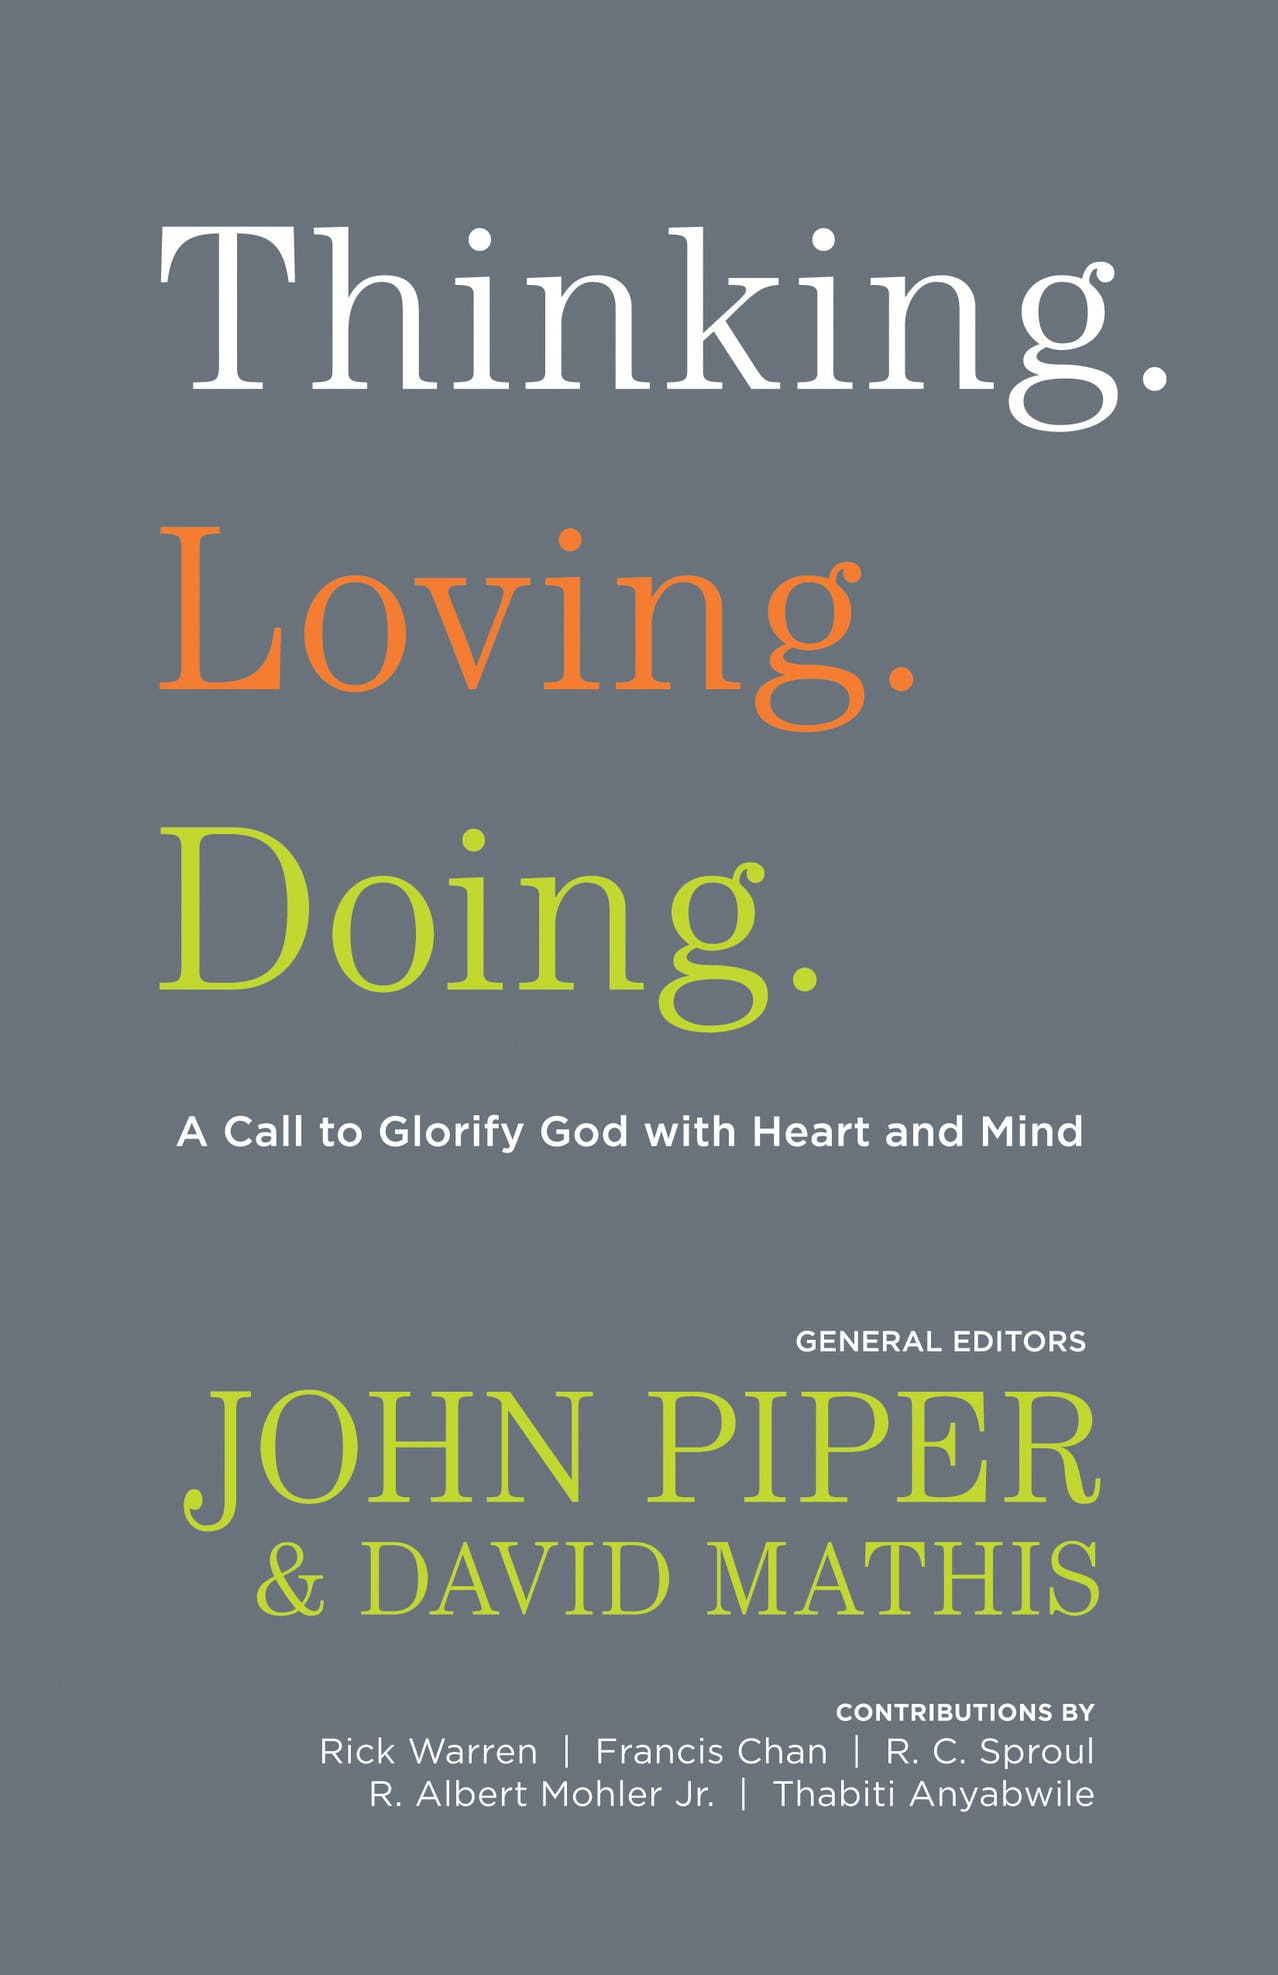 DOWNLOAD PDF: Thinking, Loving, Doing by John Piper 1